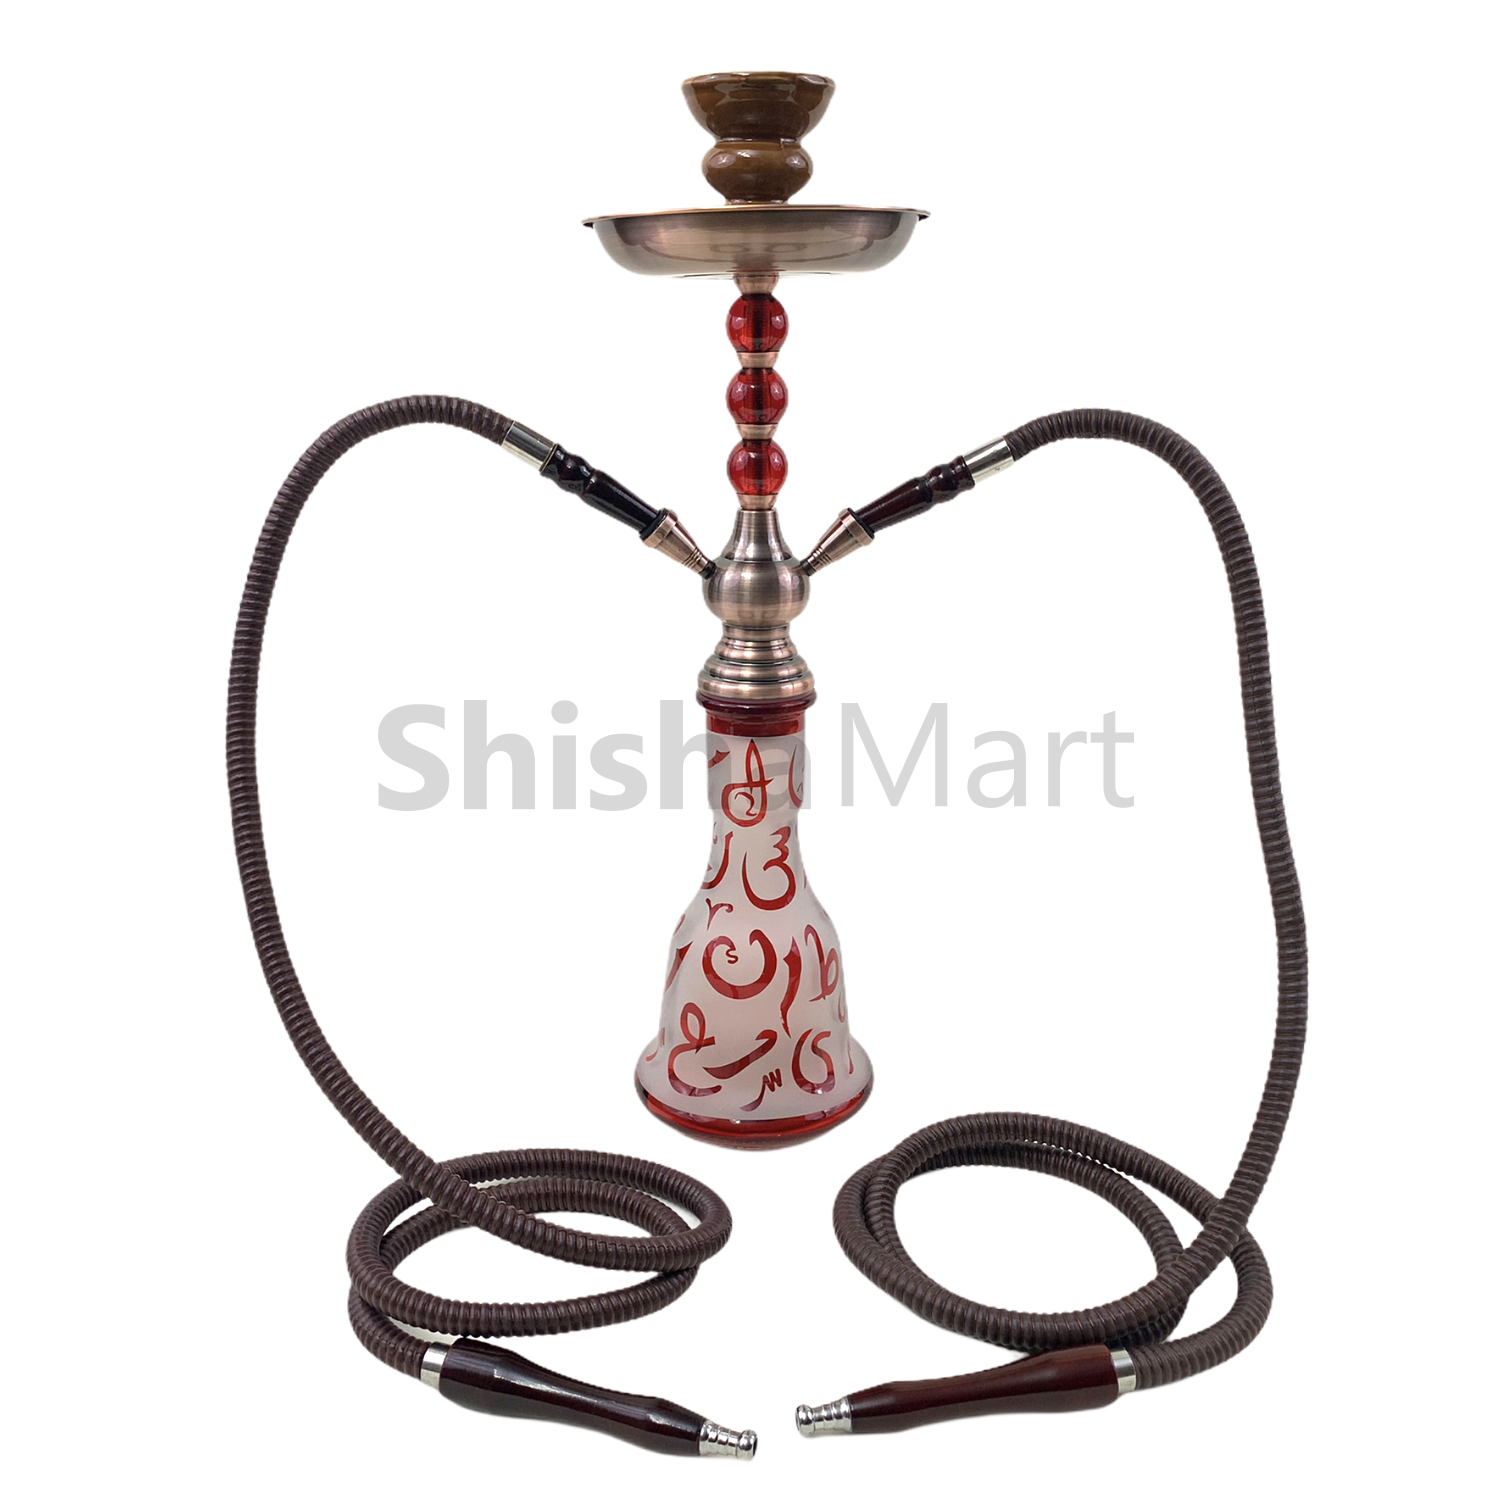 Zanobia Two Hoses Hookah 274: Shop Best Prices